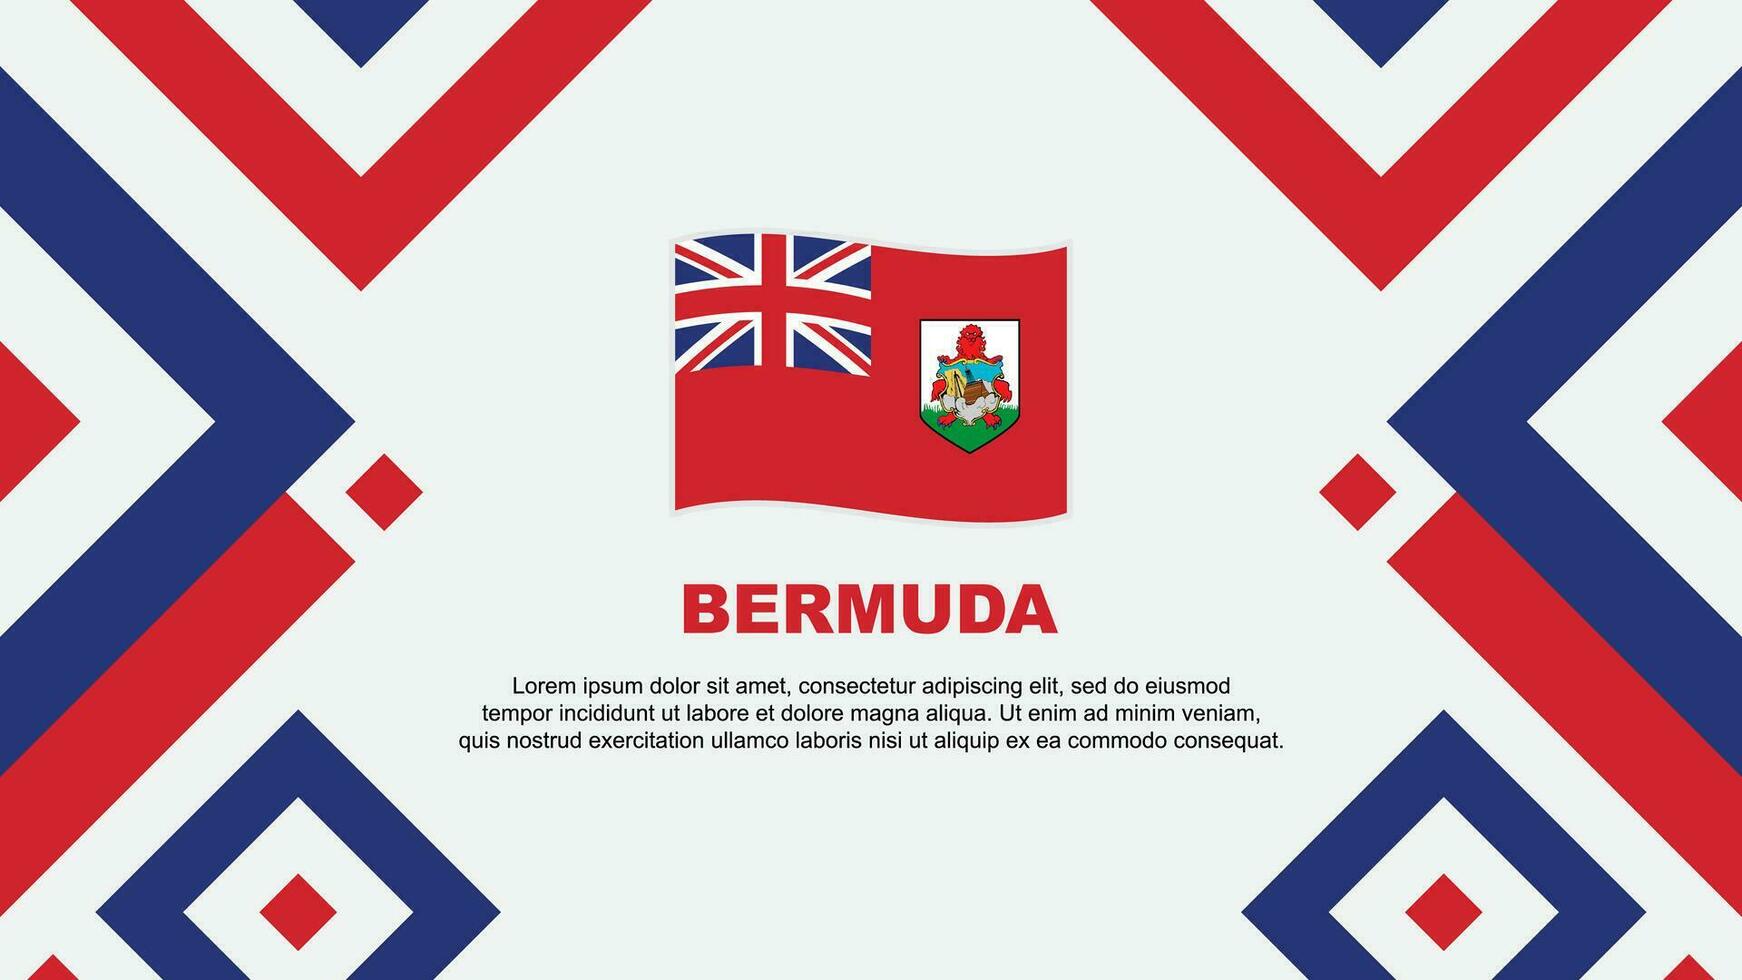 Bermuda Flag Abstract Background Design Template. Bermuda Independence Day Banner Wallpaper Vector Illustration. Bermuda Template